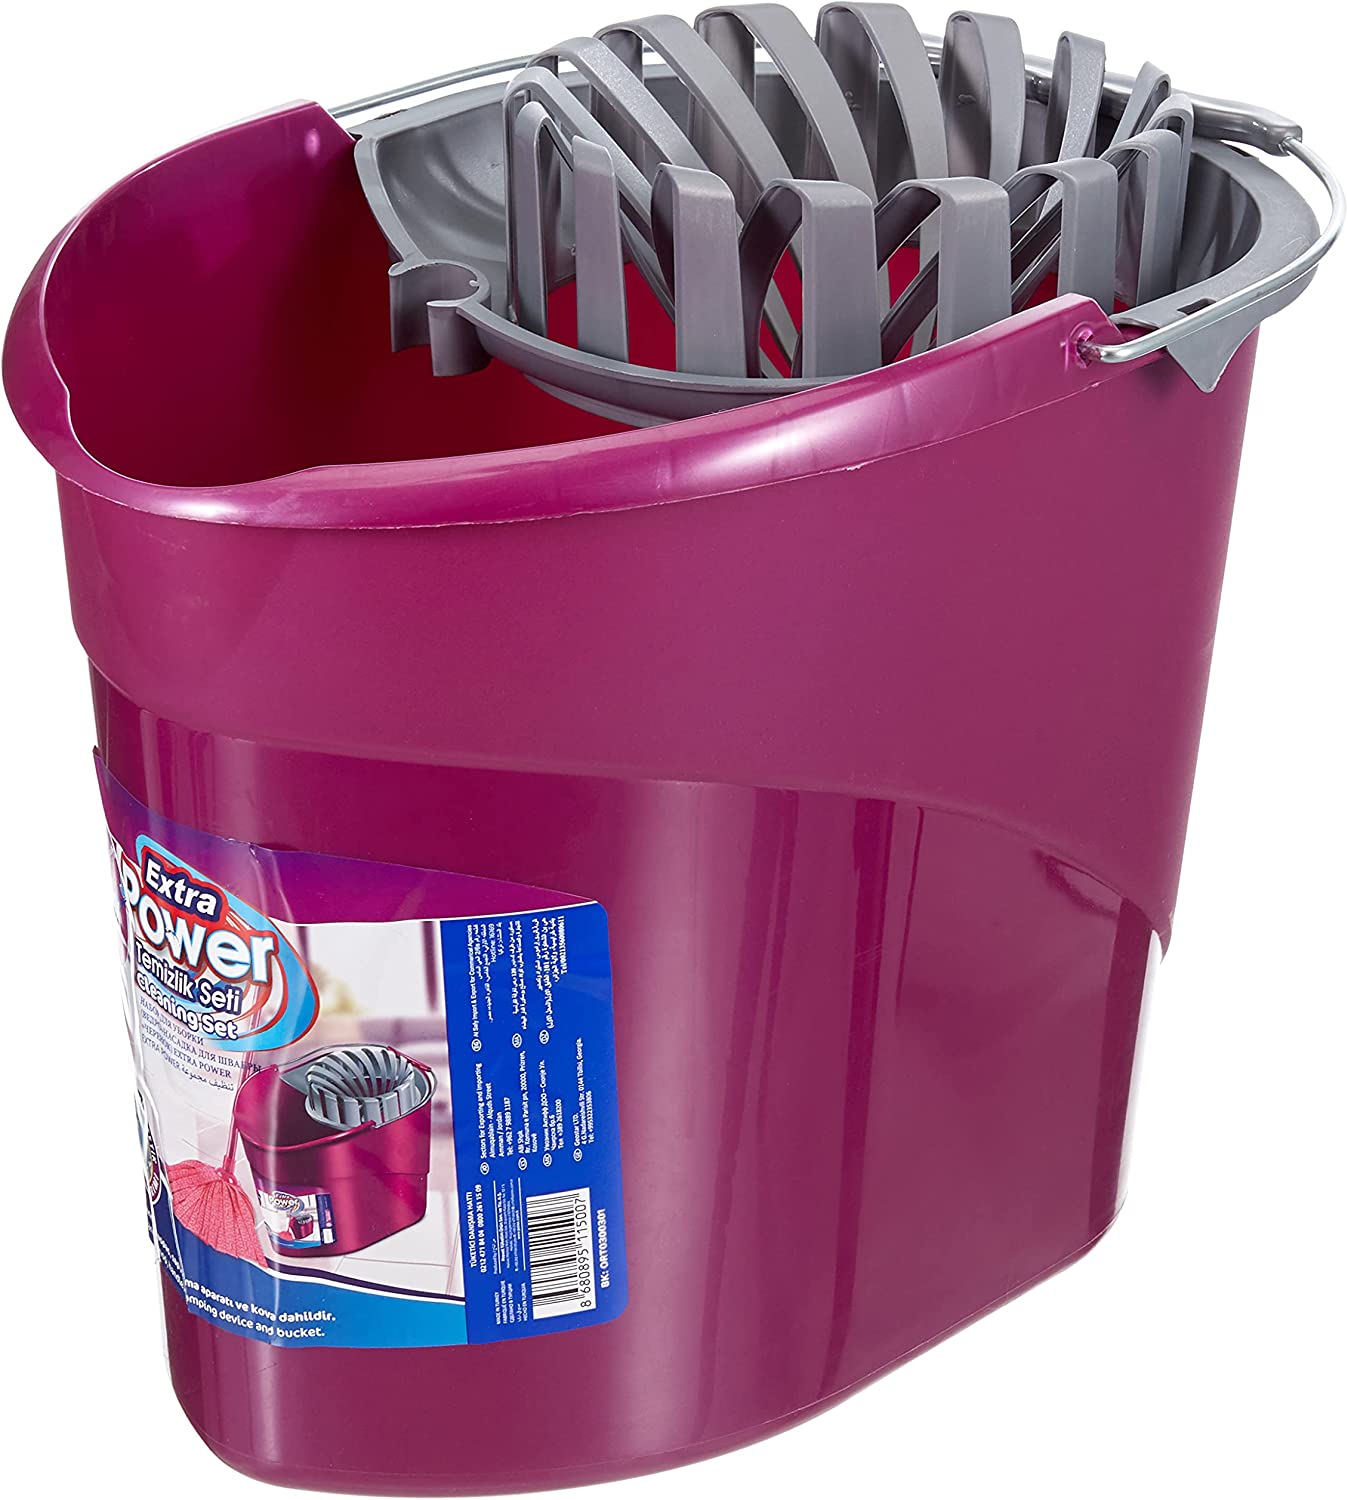 Get Your Cleaning Done Efficiently with Parex Extra Power Mop Bucket Set | Supply Master | Accra, Ghana Janitorial & Cleaning Buy Tools hardware Building materials